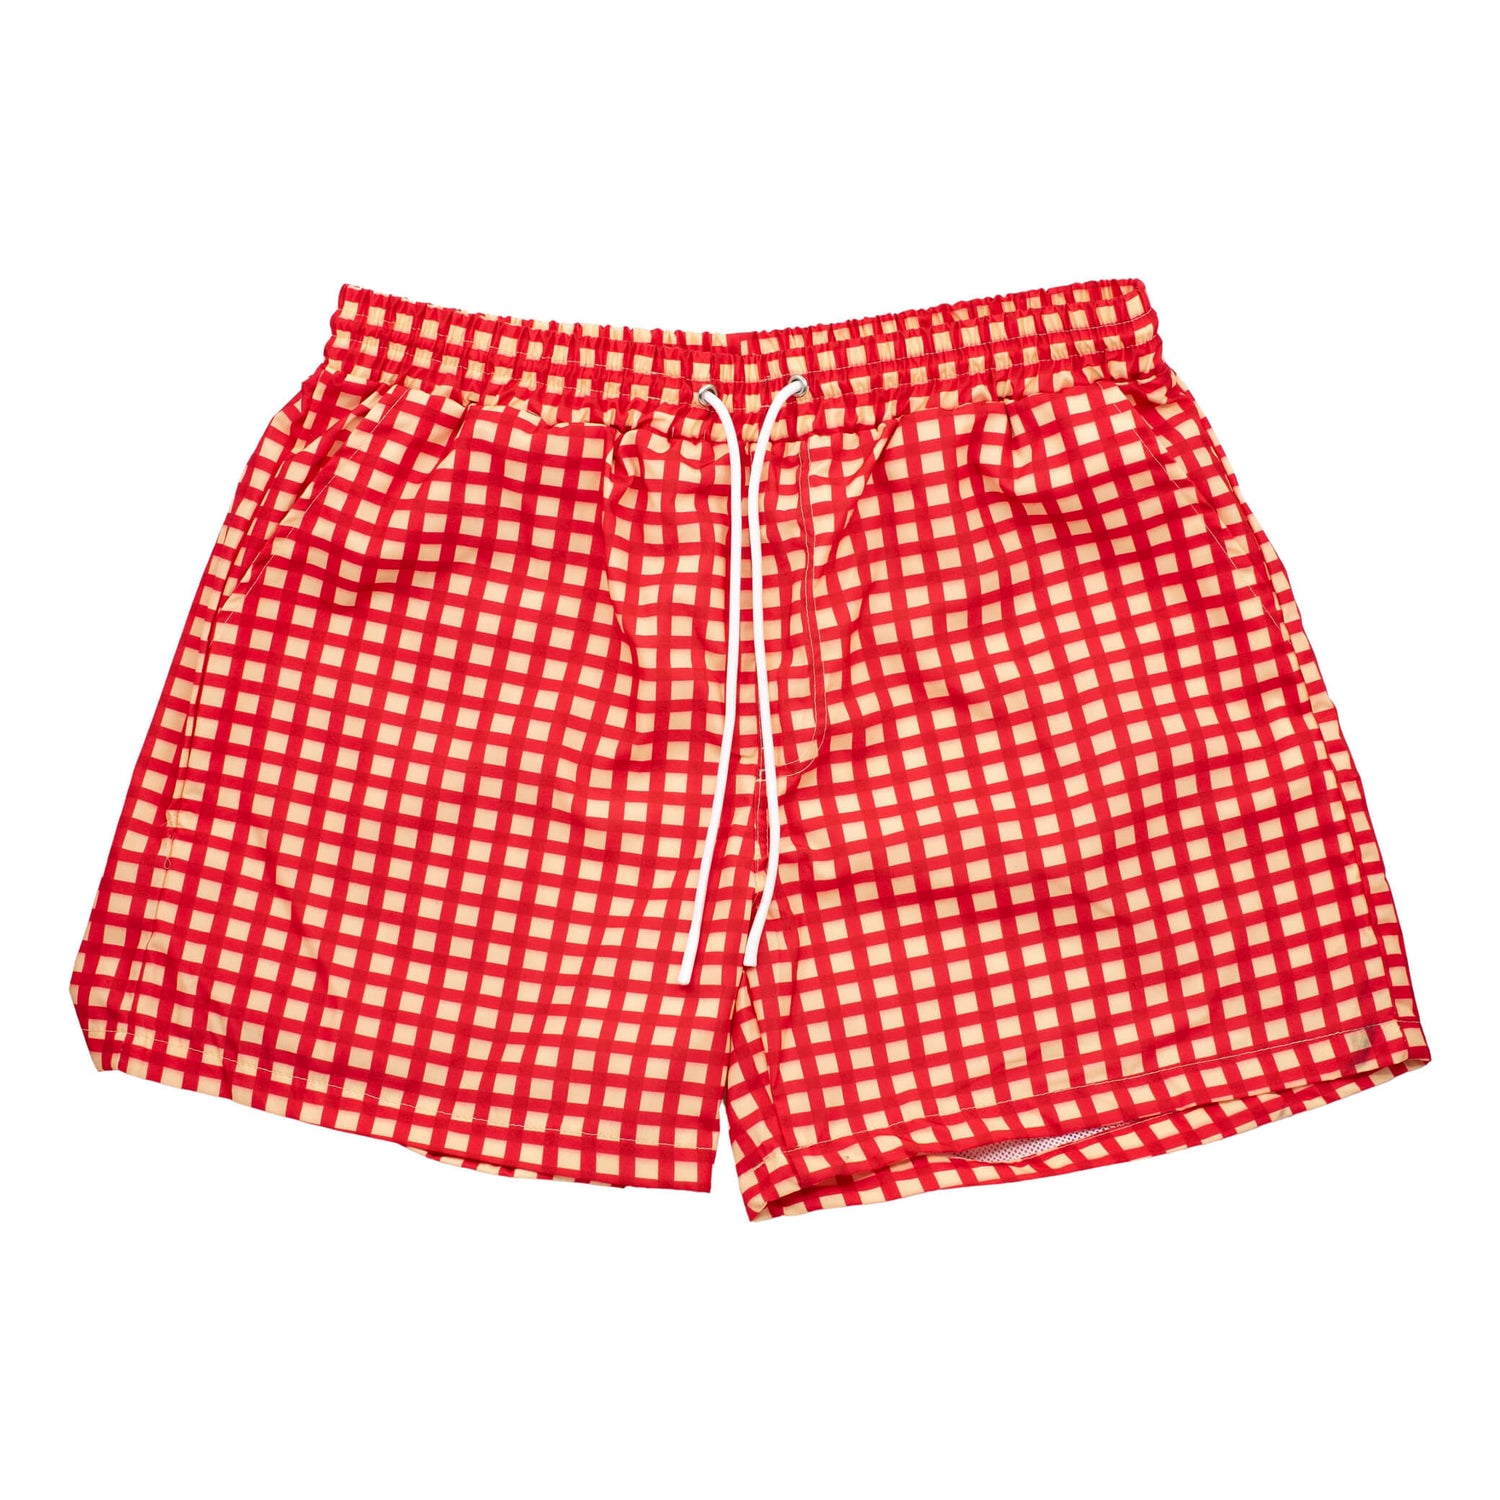 Red Checker swimwear by Vibrant Hound. It is Red with cream checkers.